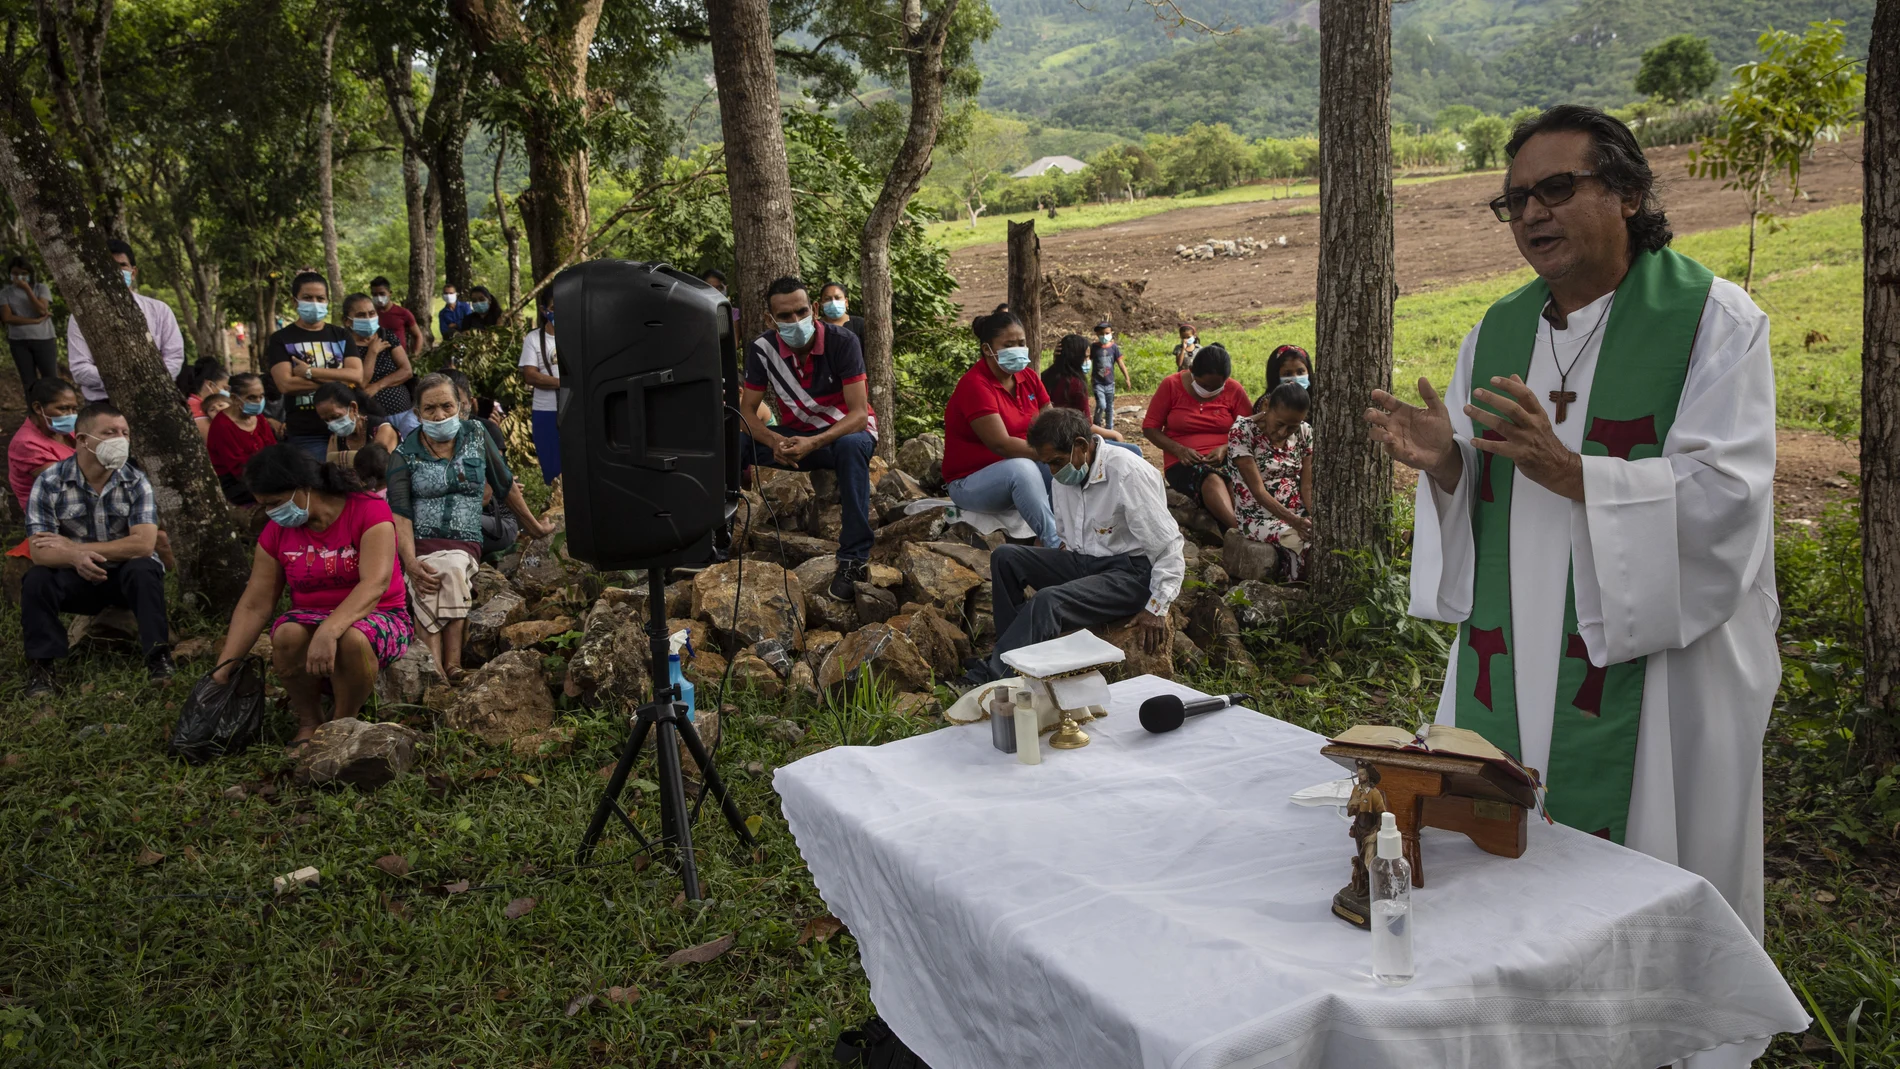 Friar Leopoldo Serrano celebrates an outdoor Mass at Mission San Francisco de Asis, in Honduras, Sunday, June 27, 2021. The pastor of souls has turned into a project manager and construction foreman for the families of La Reina, a nearby Honduran village buried in an epic mudslide in November 2020, its families among nearly half a million Central Americans displaced by Hurricanes Eta and Iota. (AP Photo/Rodrigo Abd)